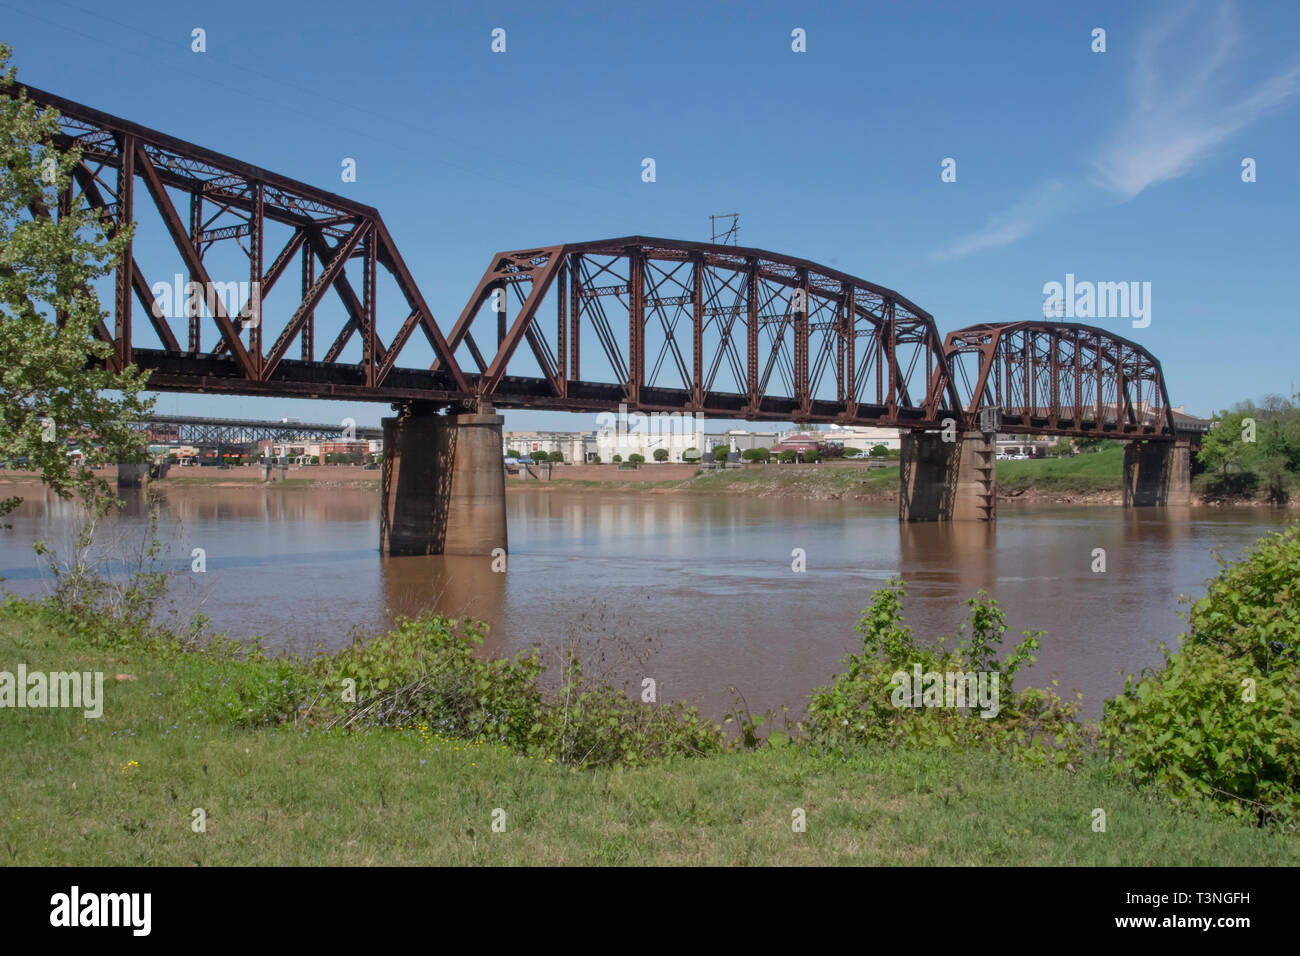 SHREVEPORT, LA., U.S.A. - April 9, 2019: This bridge was originally built by Illinois Central Railroad, but is now part of the Kansas City Southern sy Stock Photo